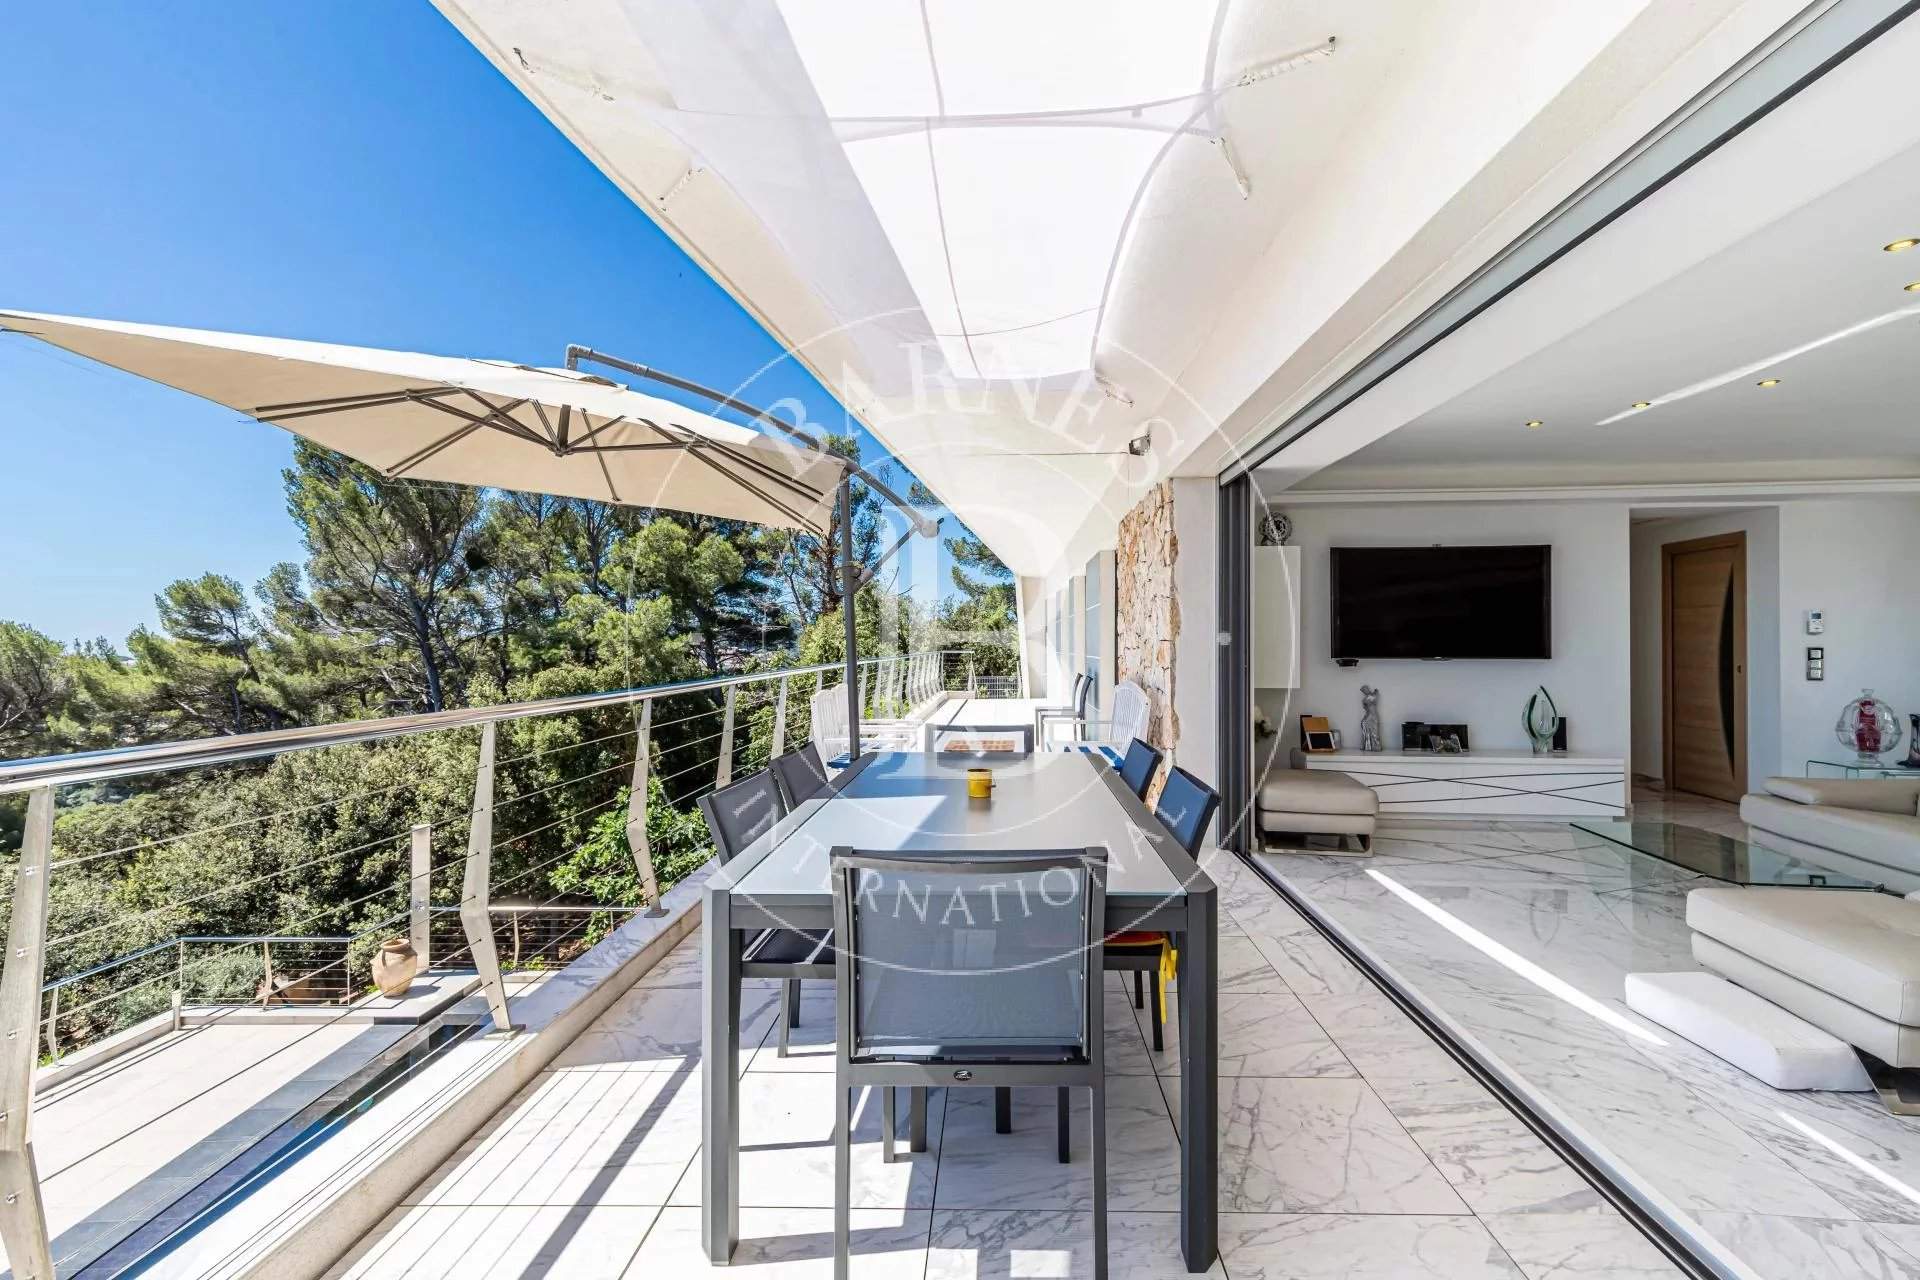 House for sale 4 Bedrooms 2368 sq ft Cannes - € 3,490,000